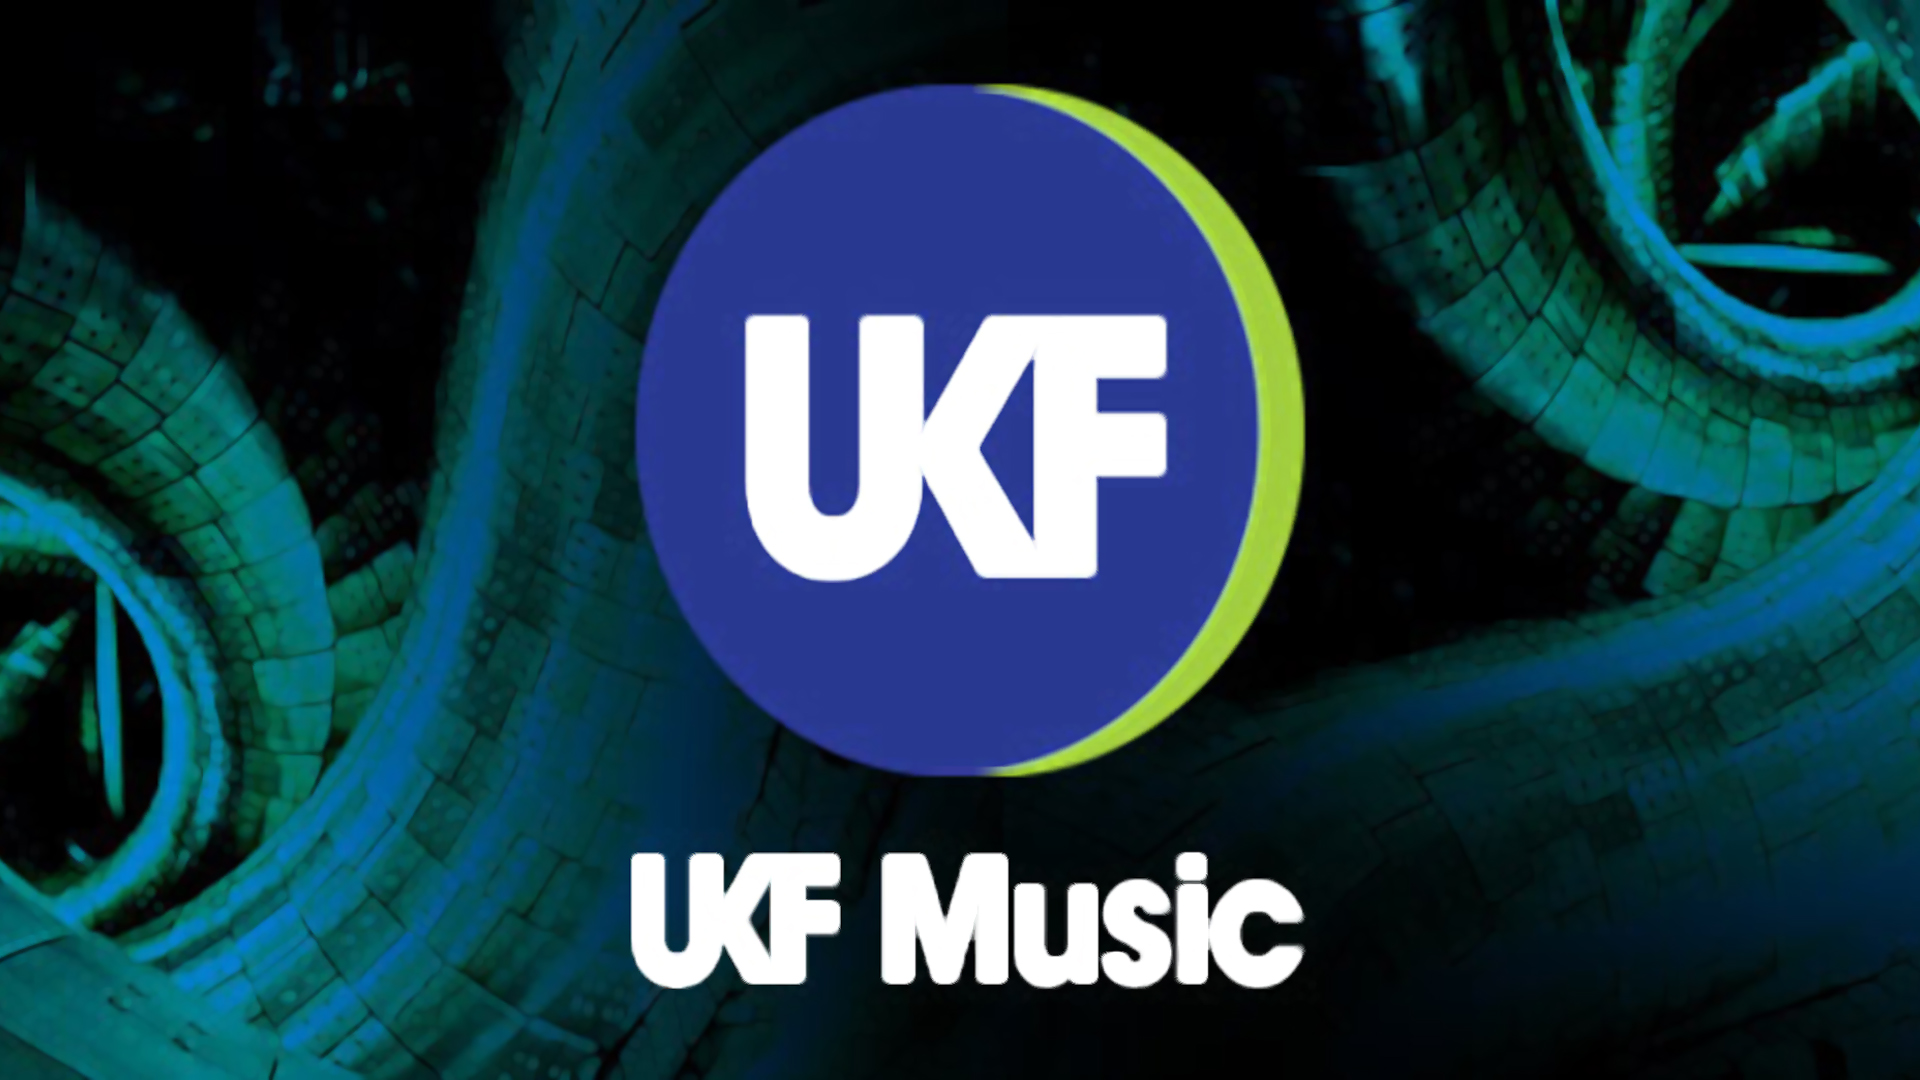 UKF Music Drum And Bass Dubstep Music Electronic Music 1920x1080